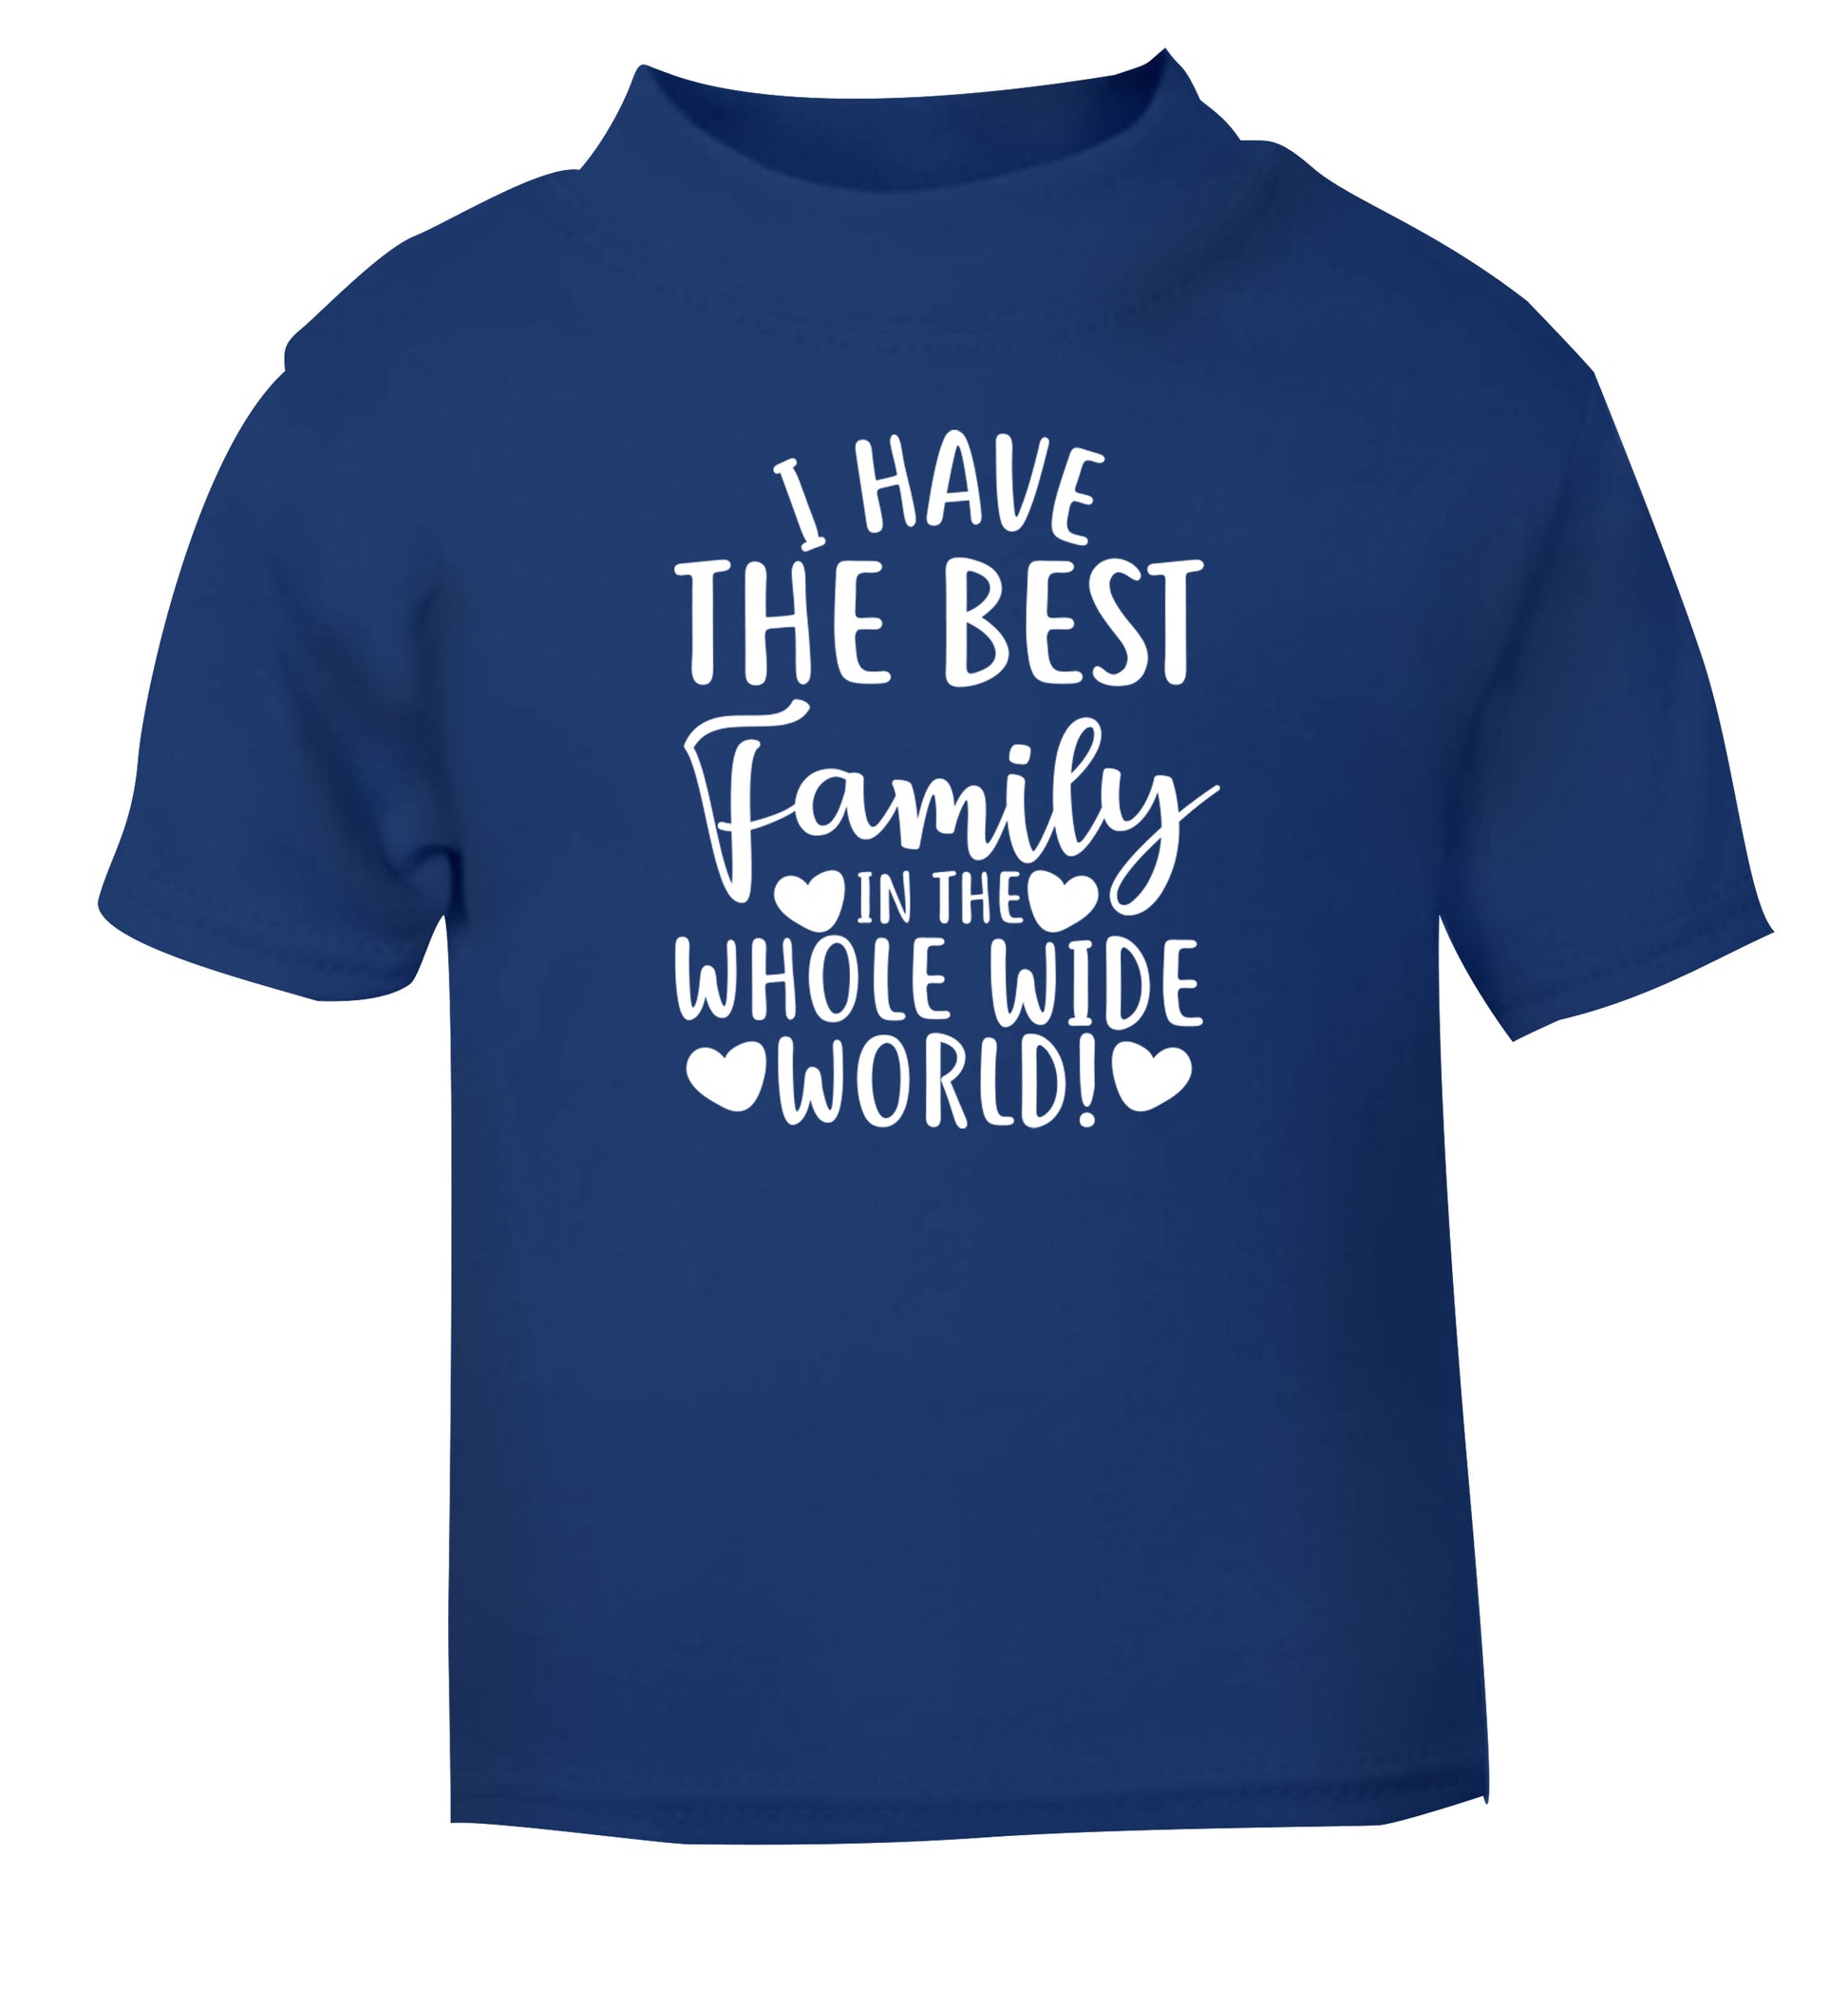 I have the best family in the whole wide world! blue Baby Toddler Tshirt 2 Years